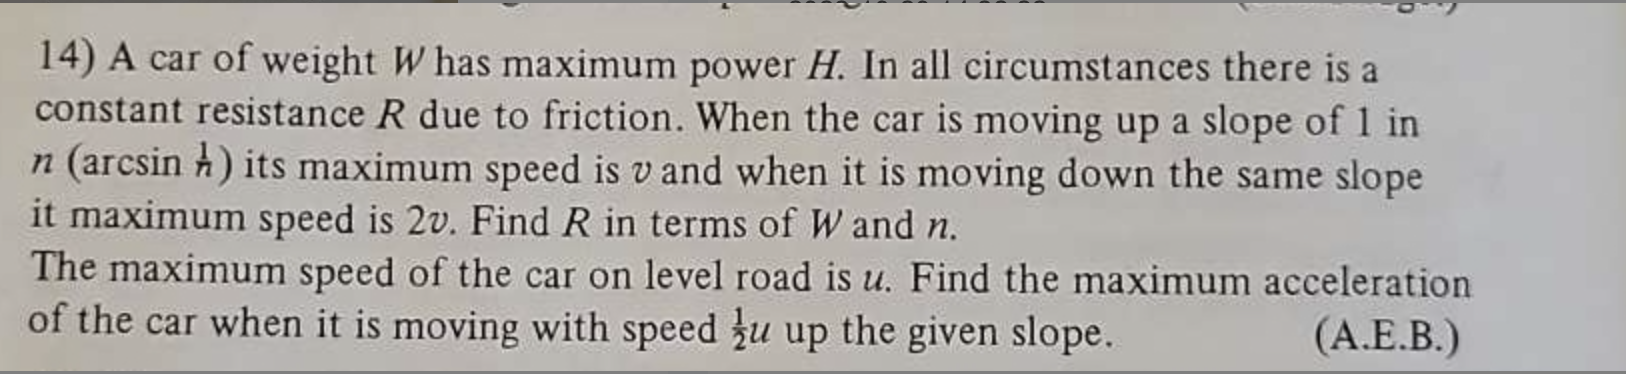 14) A car of weight W has maximum power H. In all circumstances there is a constant resistance R due to